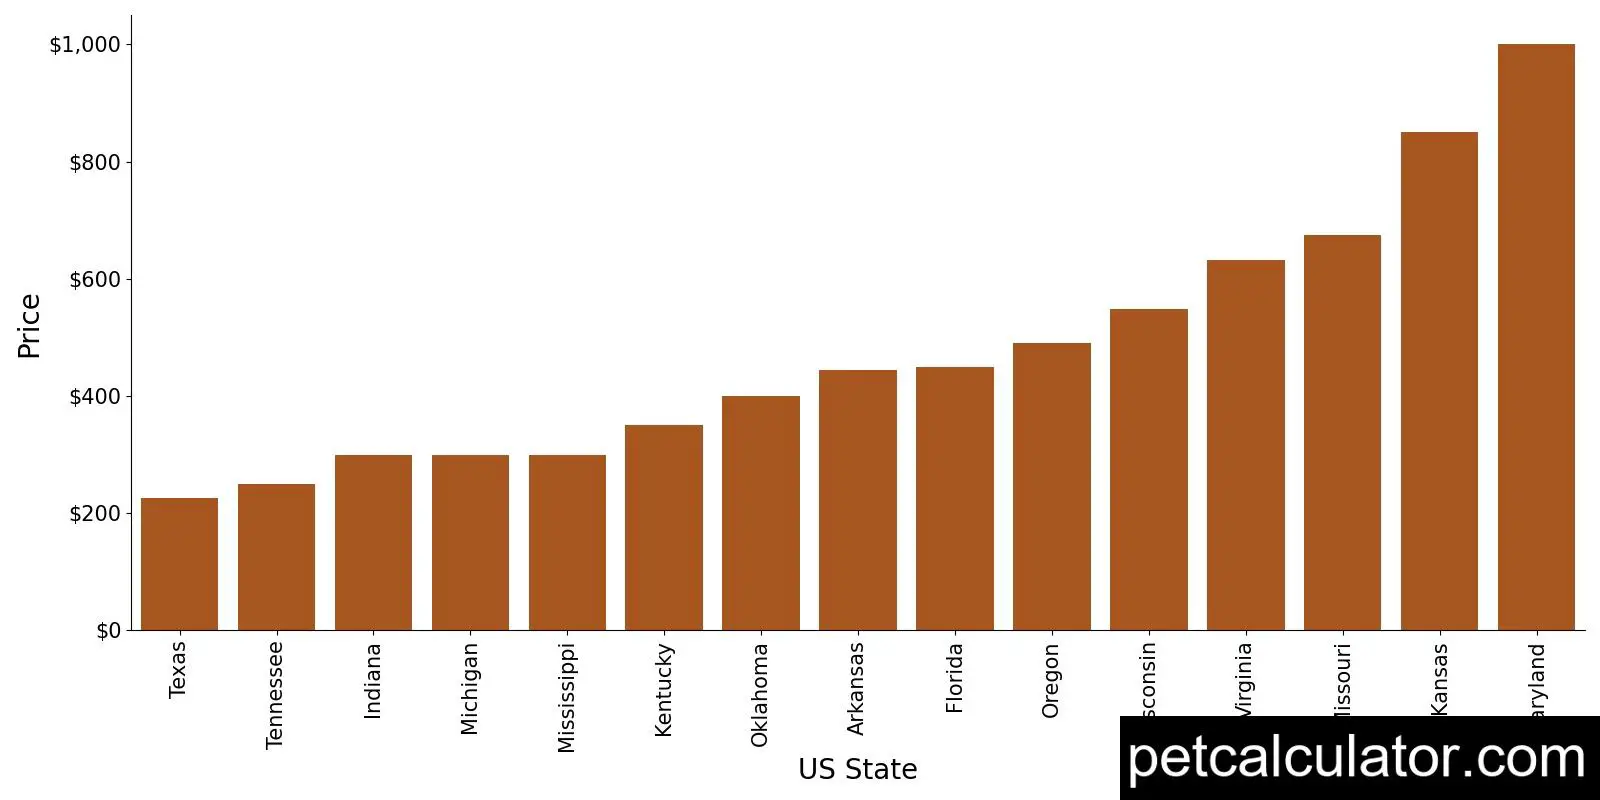 Price of Black and Tan Coonhound by US State 